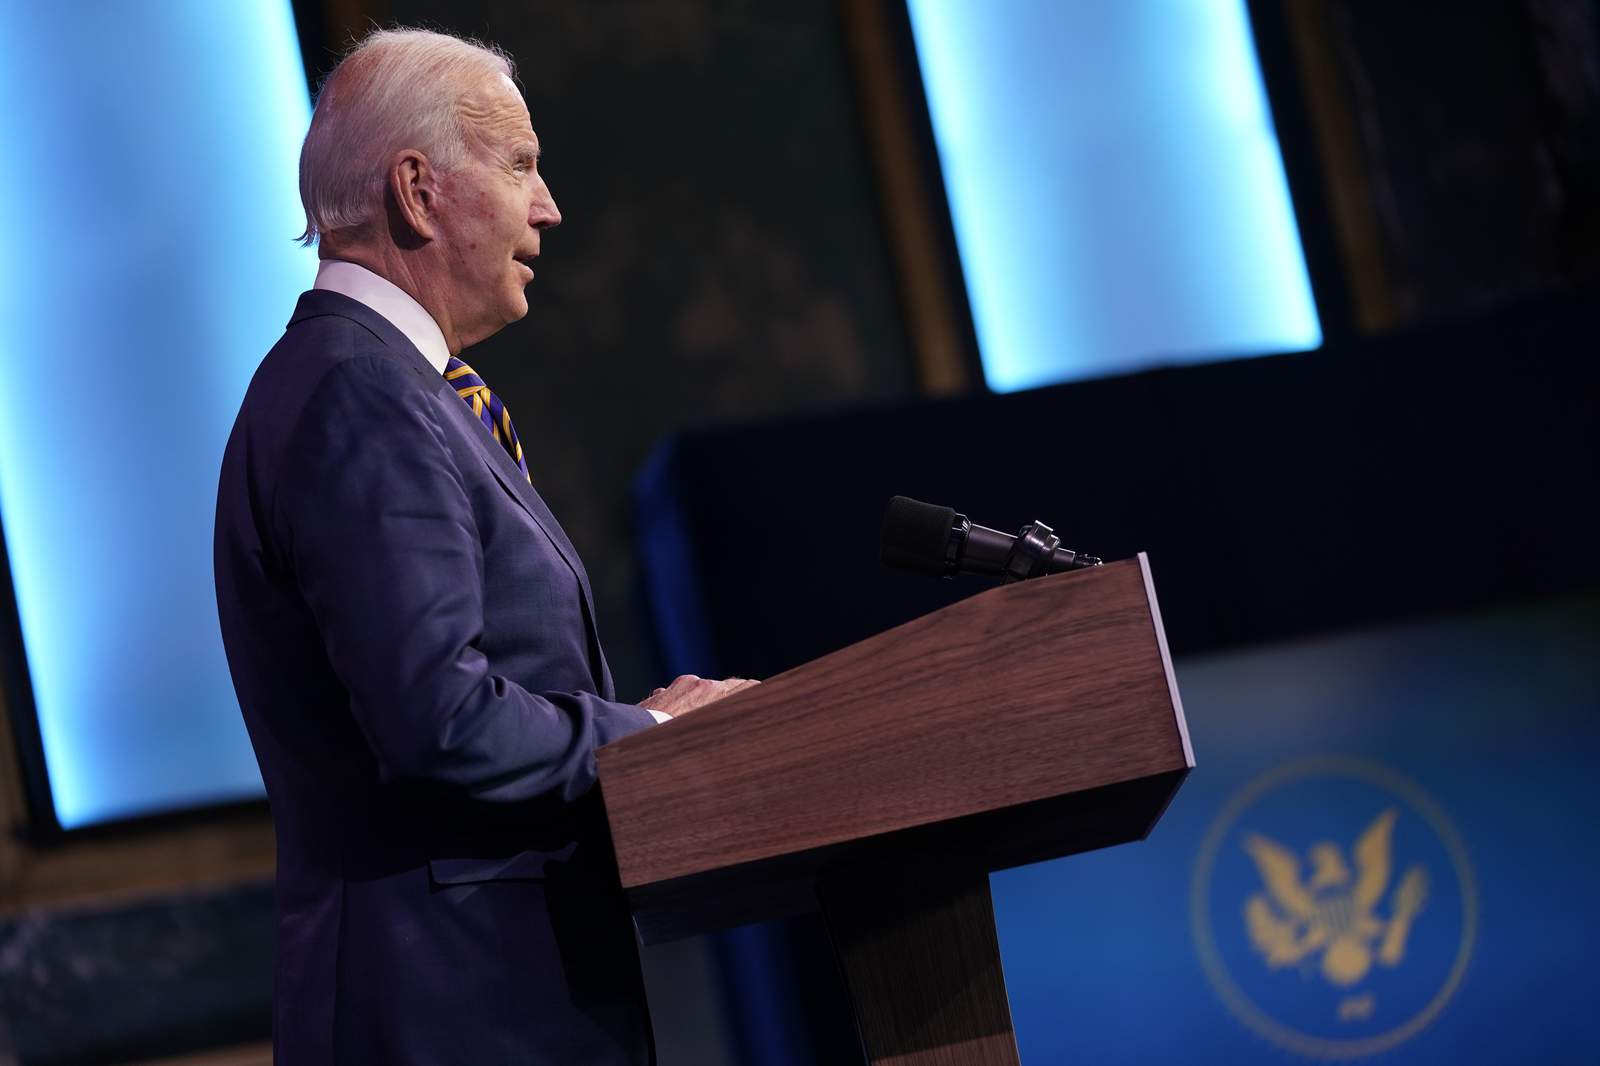 Biden criticizes pace of vaccine rollout, vows to accelerate